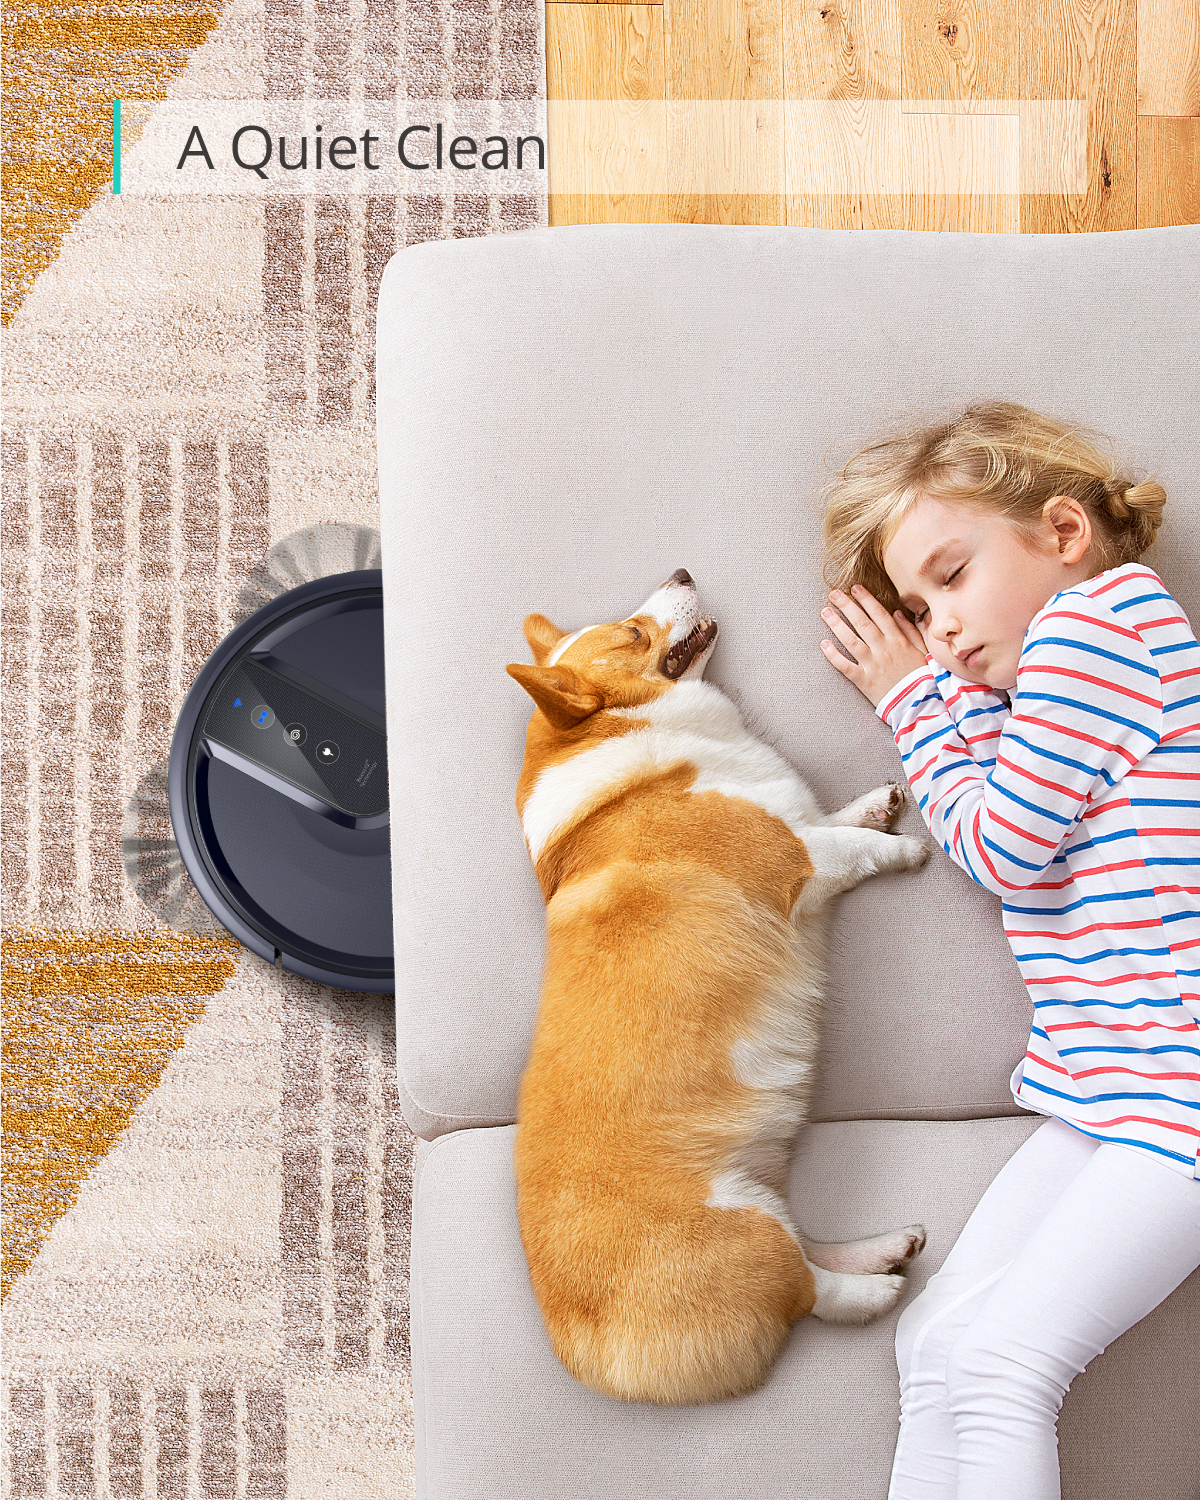 Anker eufy 25C Wi-Fi Connected Robot Vacuum, Great for Picking up Pet Hairs, Quiet, Slim - image 5 of 9